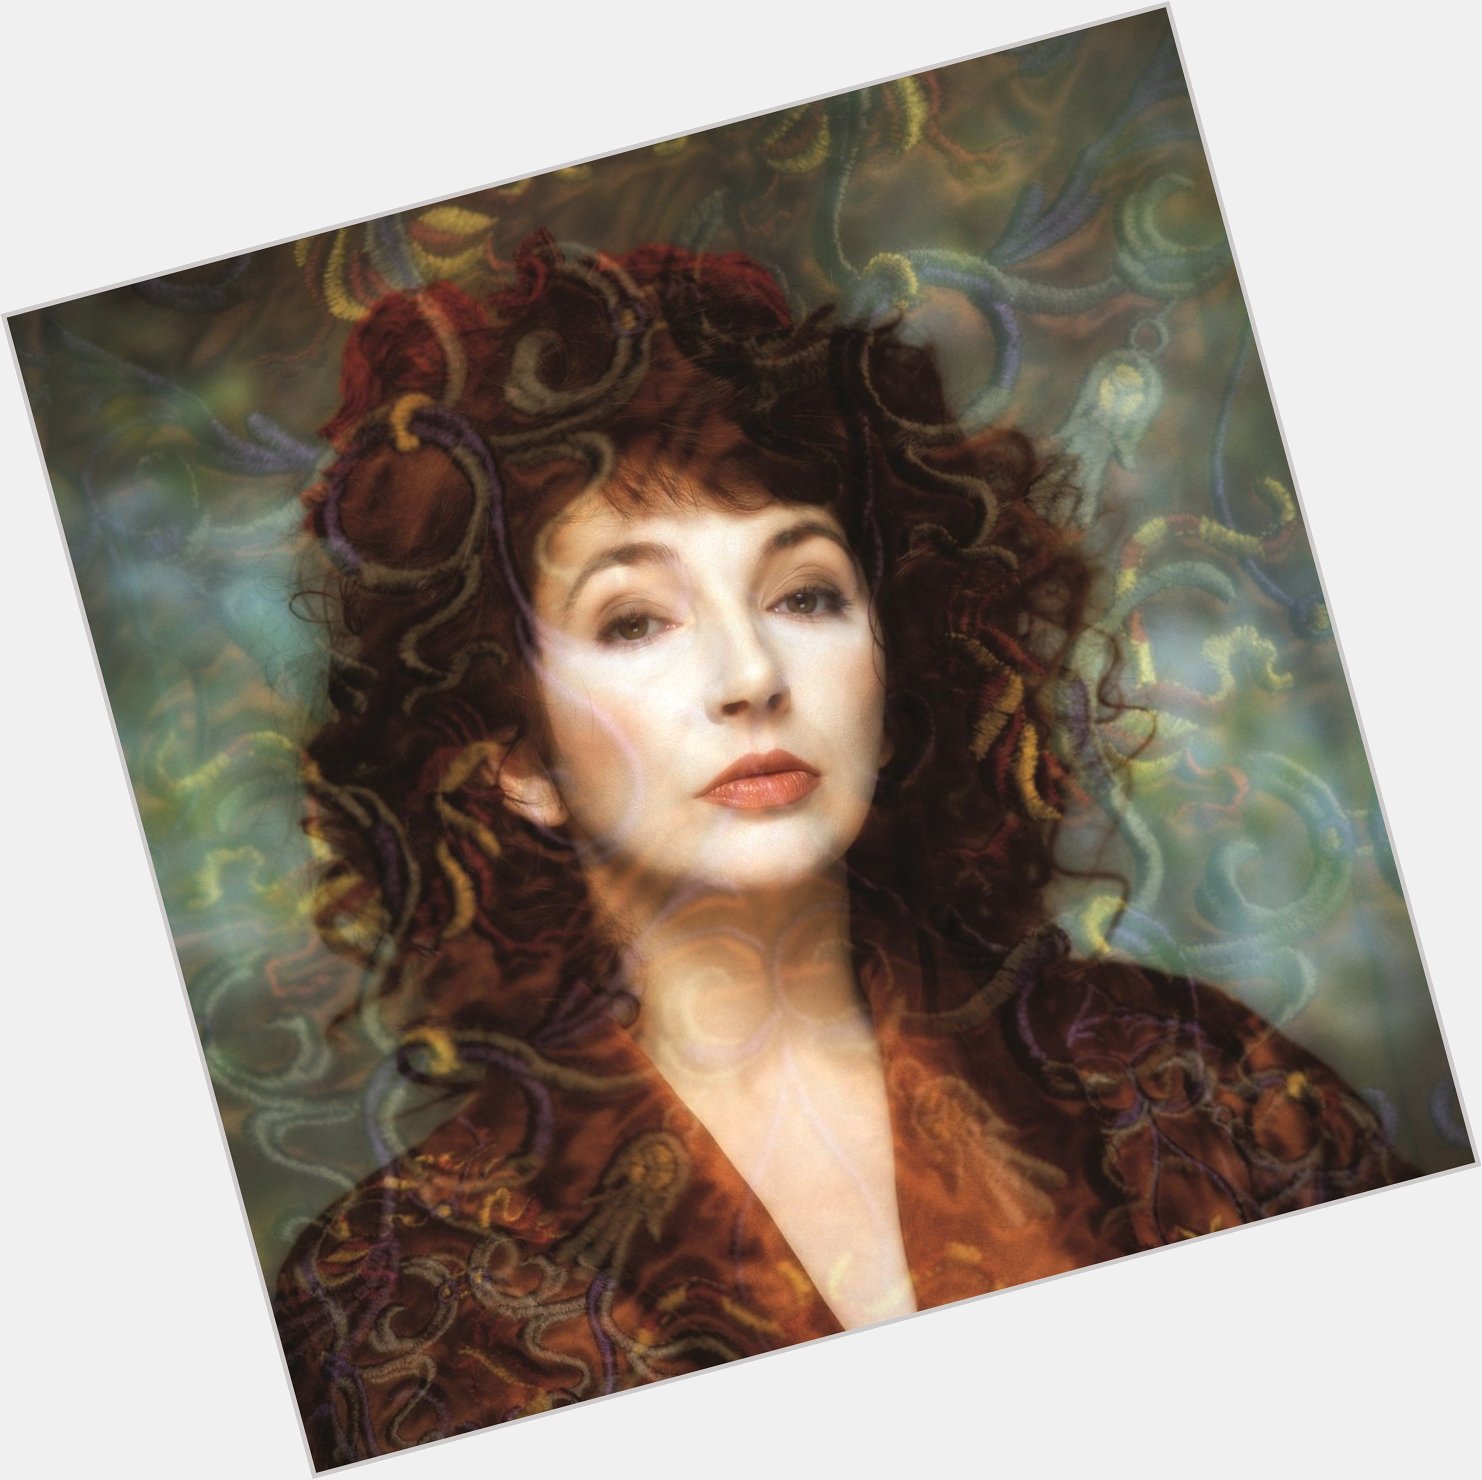 Happy 60th birthday to the incredible Kate Bush 